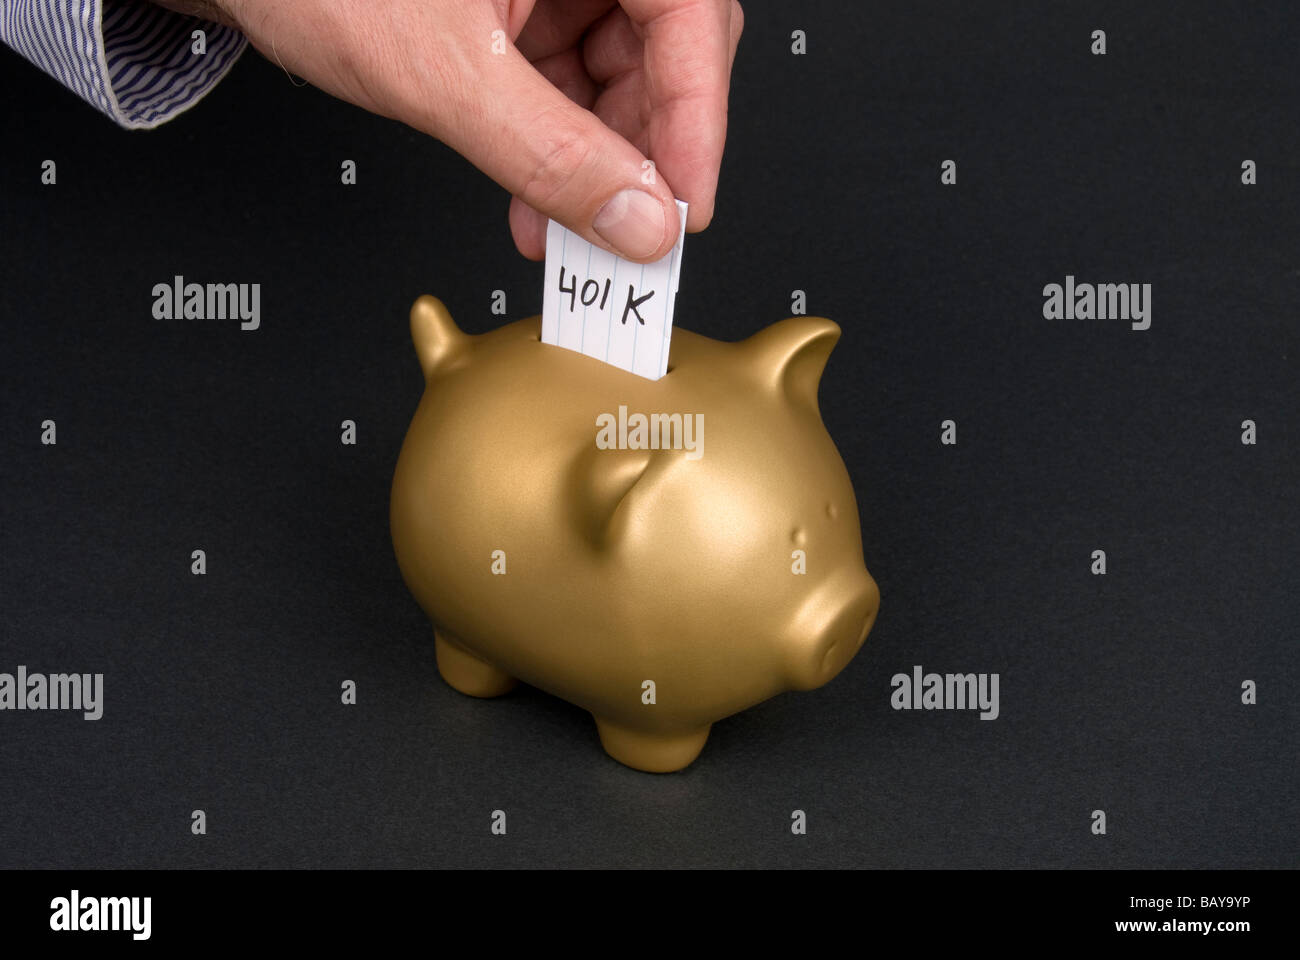 A man places a slip of paper into a piggy bank Stock Photo